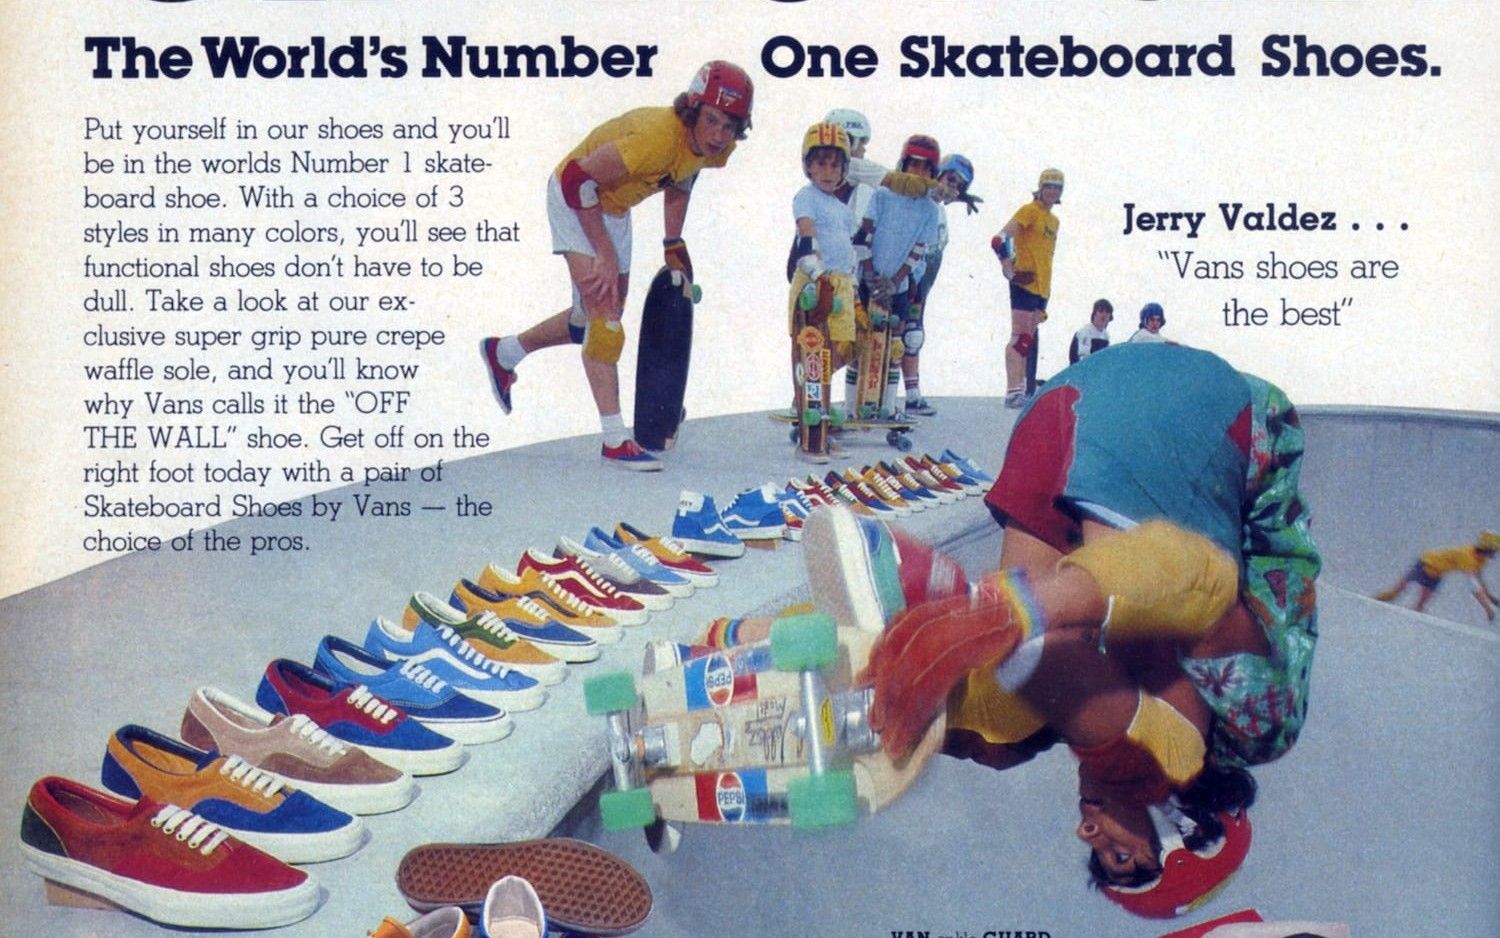 The story of Vans, the ultimate skate shoe company